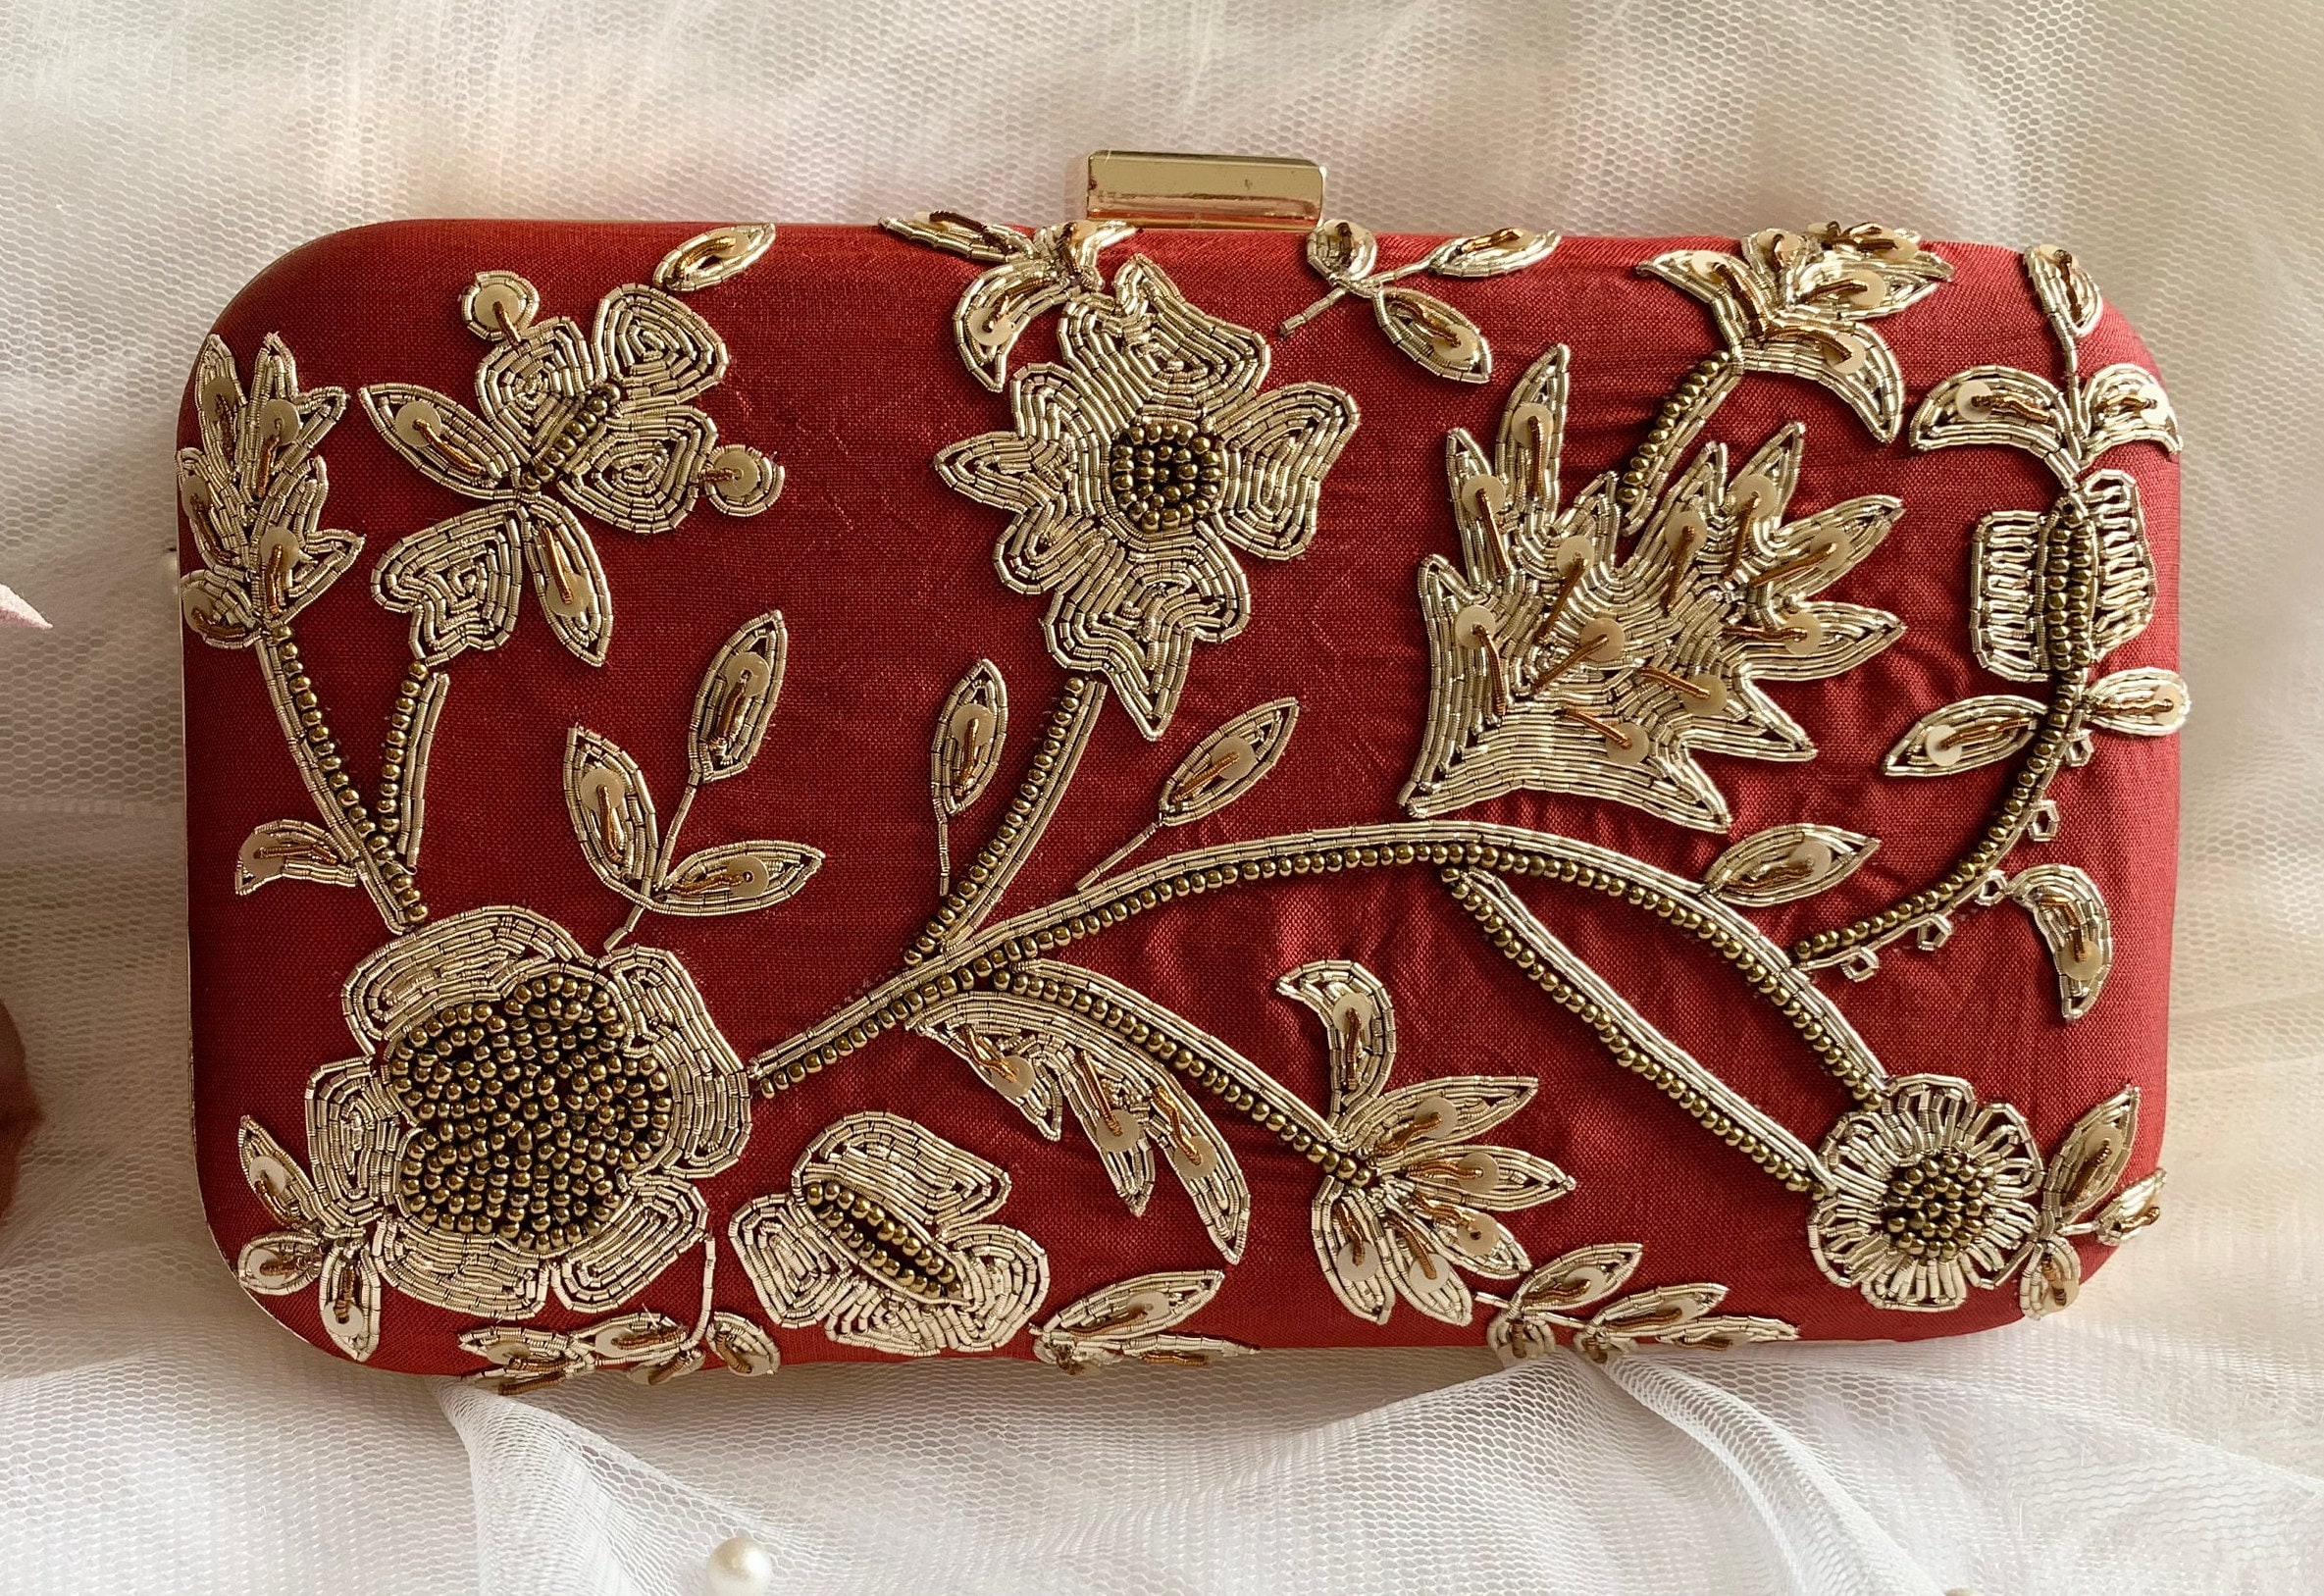 Handmade Designer Clutch Purse, Bag Shoulder Strap and Handle for Wedding, Ethnic Wear, Evening Party and Prom.